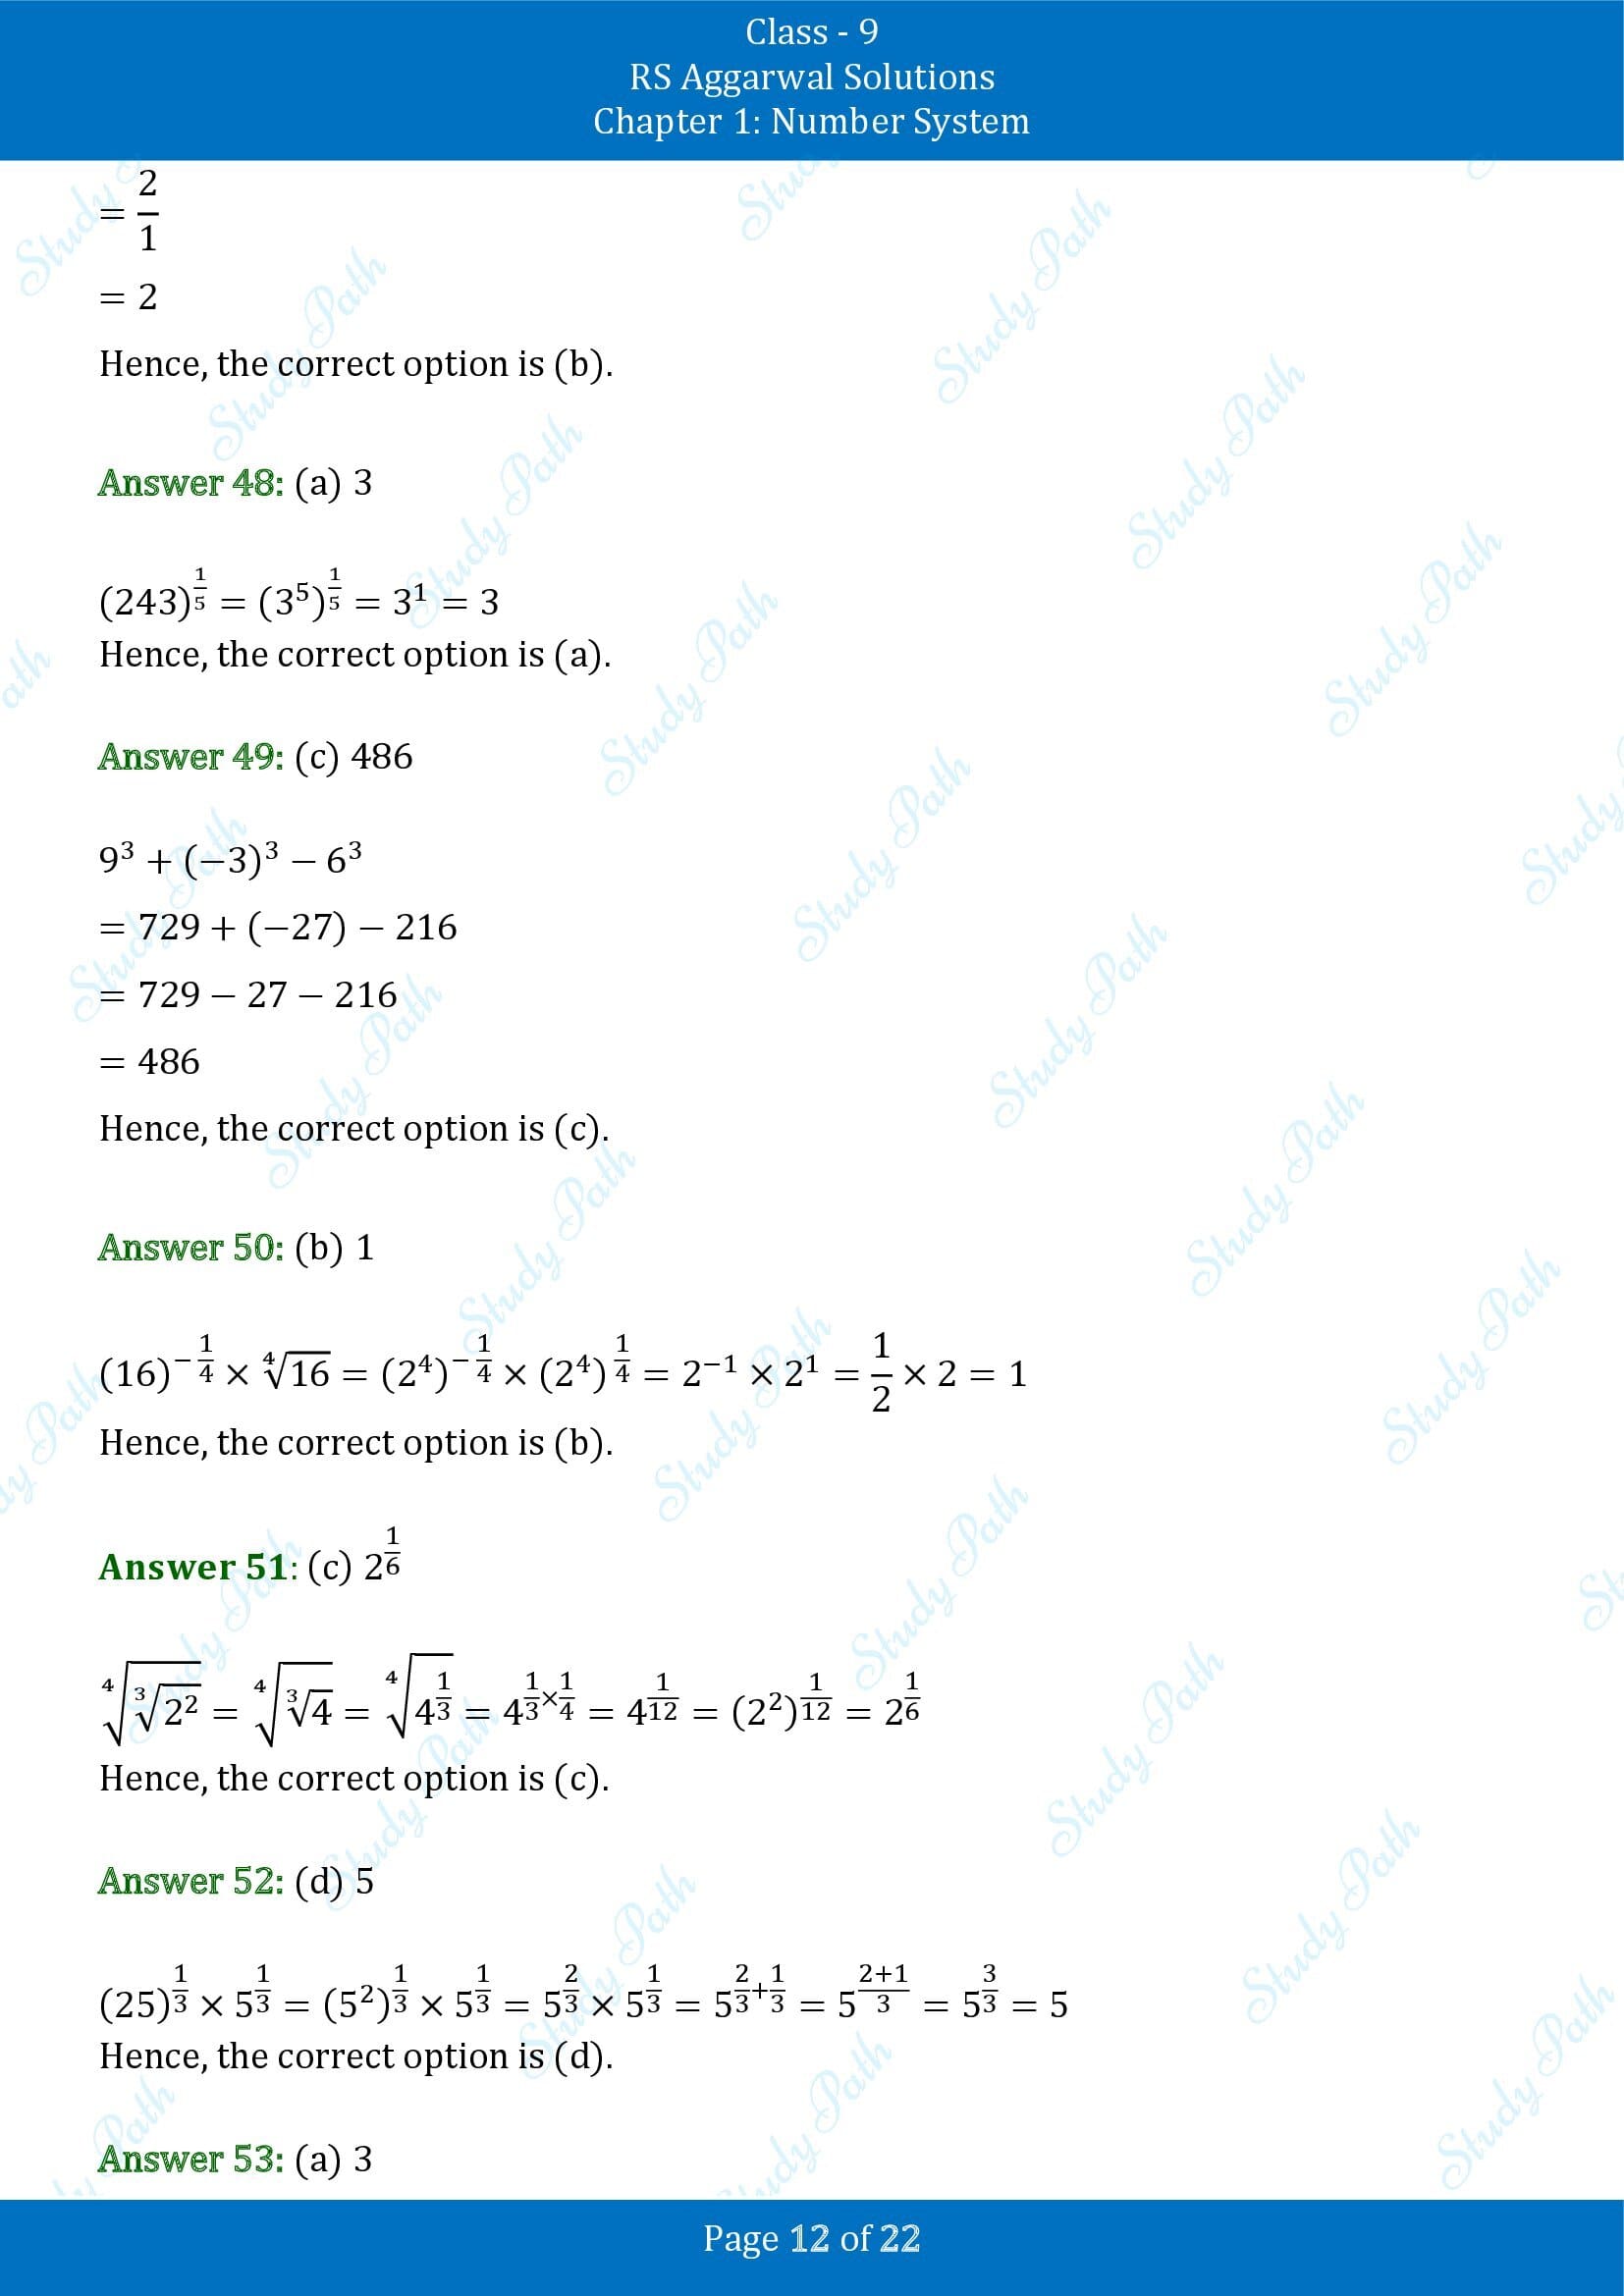 RS Aggarwal Solutions Class 9 Chapter 1 Number System Multiple Choice Questions MCQs 00012